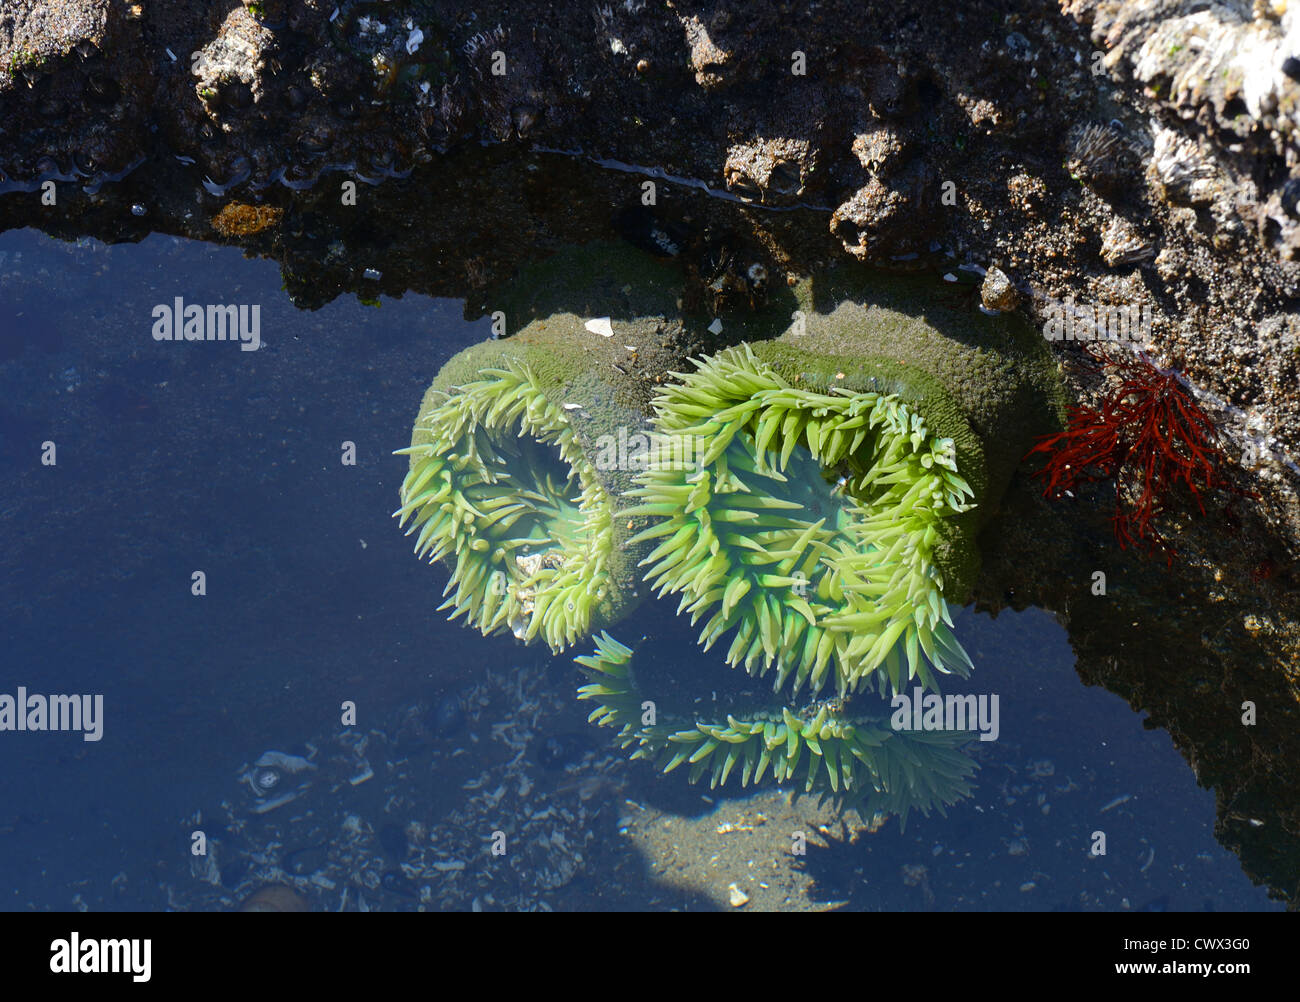 Open green Sea Anemone (Anthopleura xanthogrammica) in a shallow tidal pool. Stock Photo